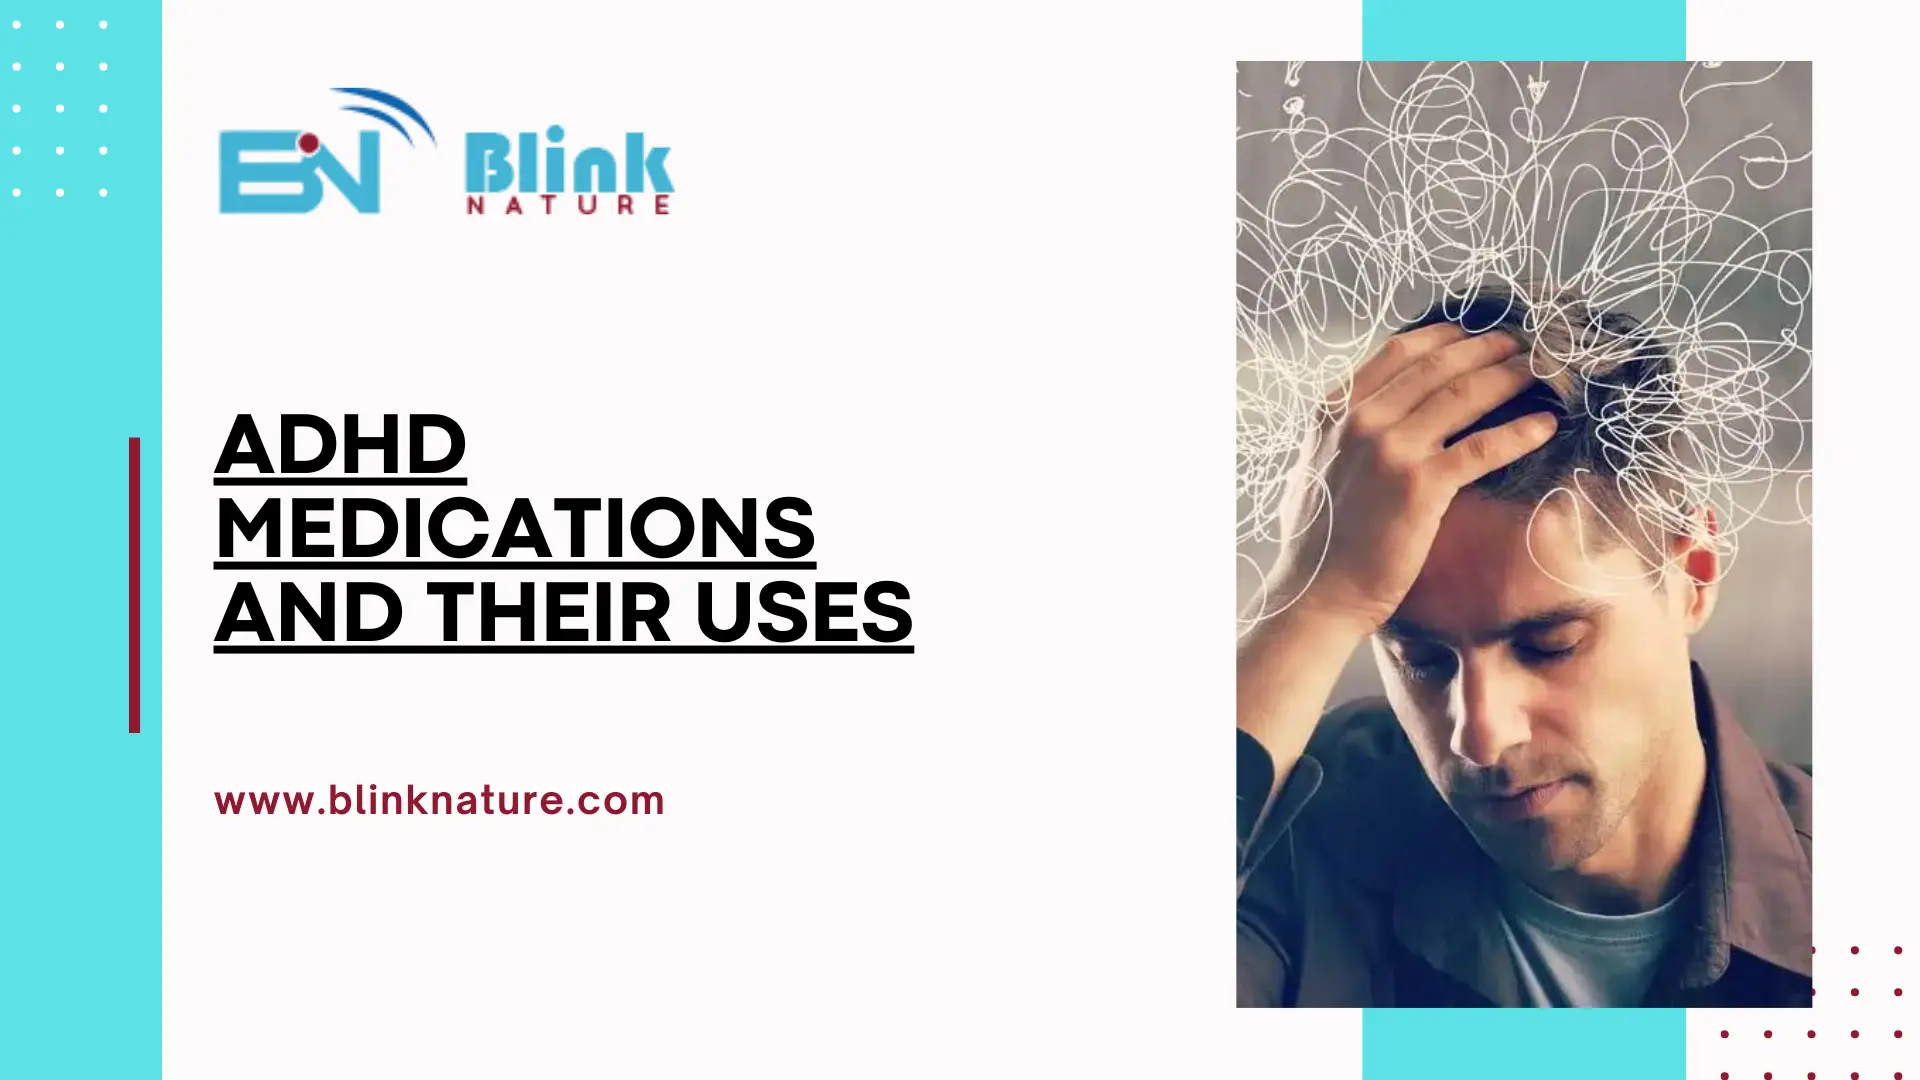 List of Top 3 Types of Commonly Prescribed ADHD Medications